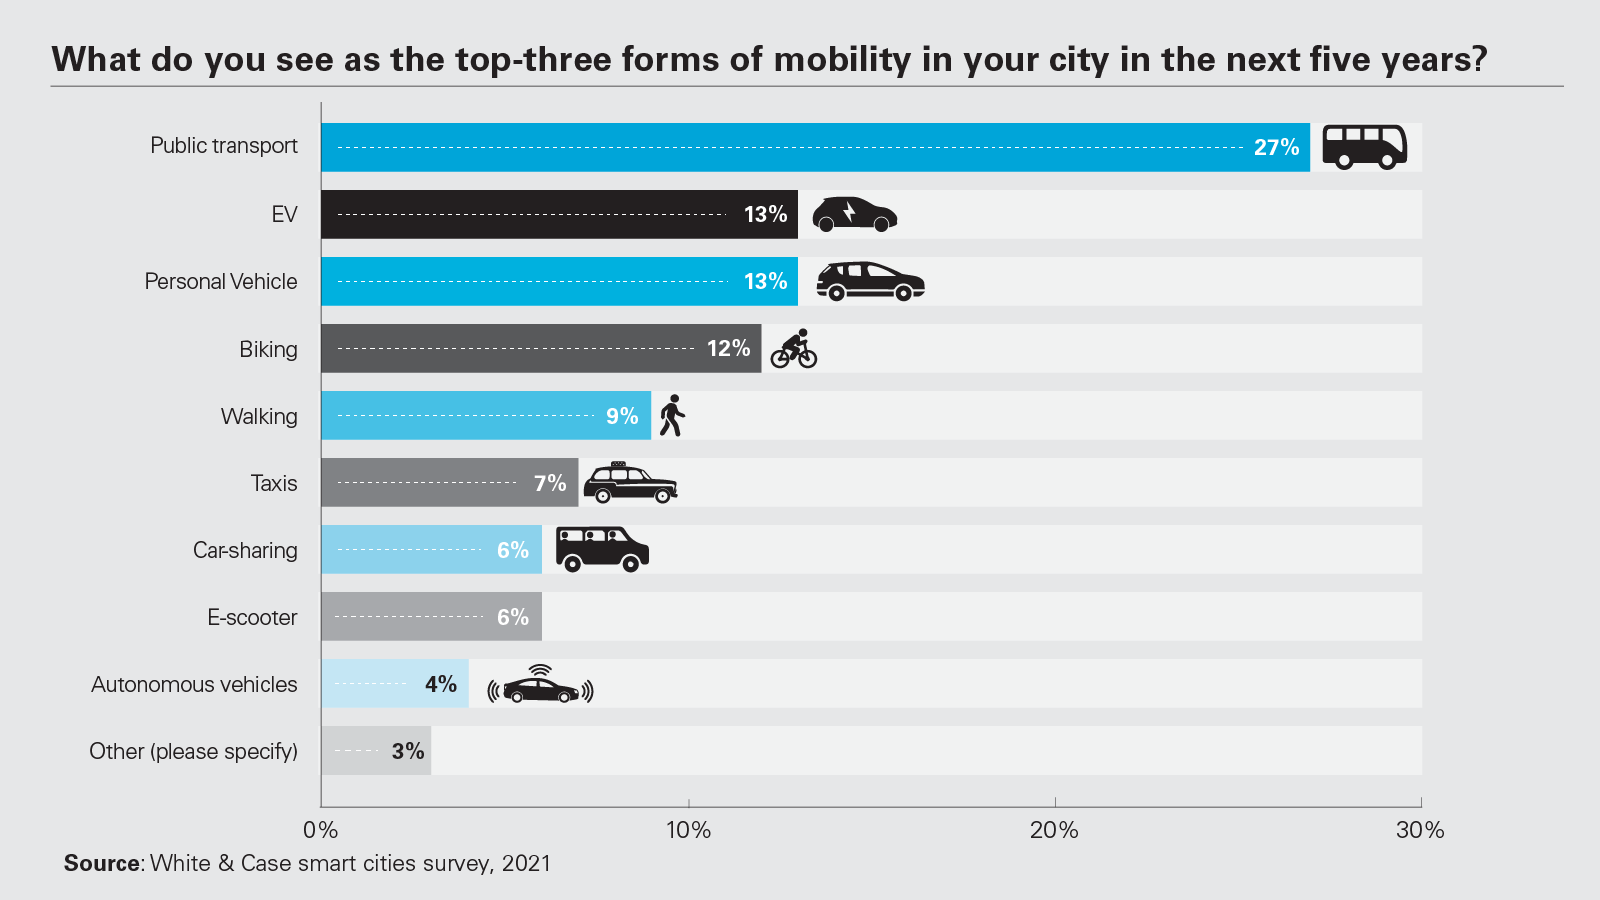 What do you see as the top-three forms of mobility in your city in the next five years?